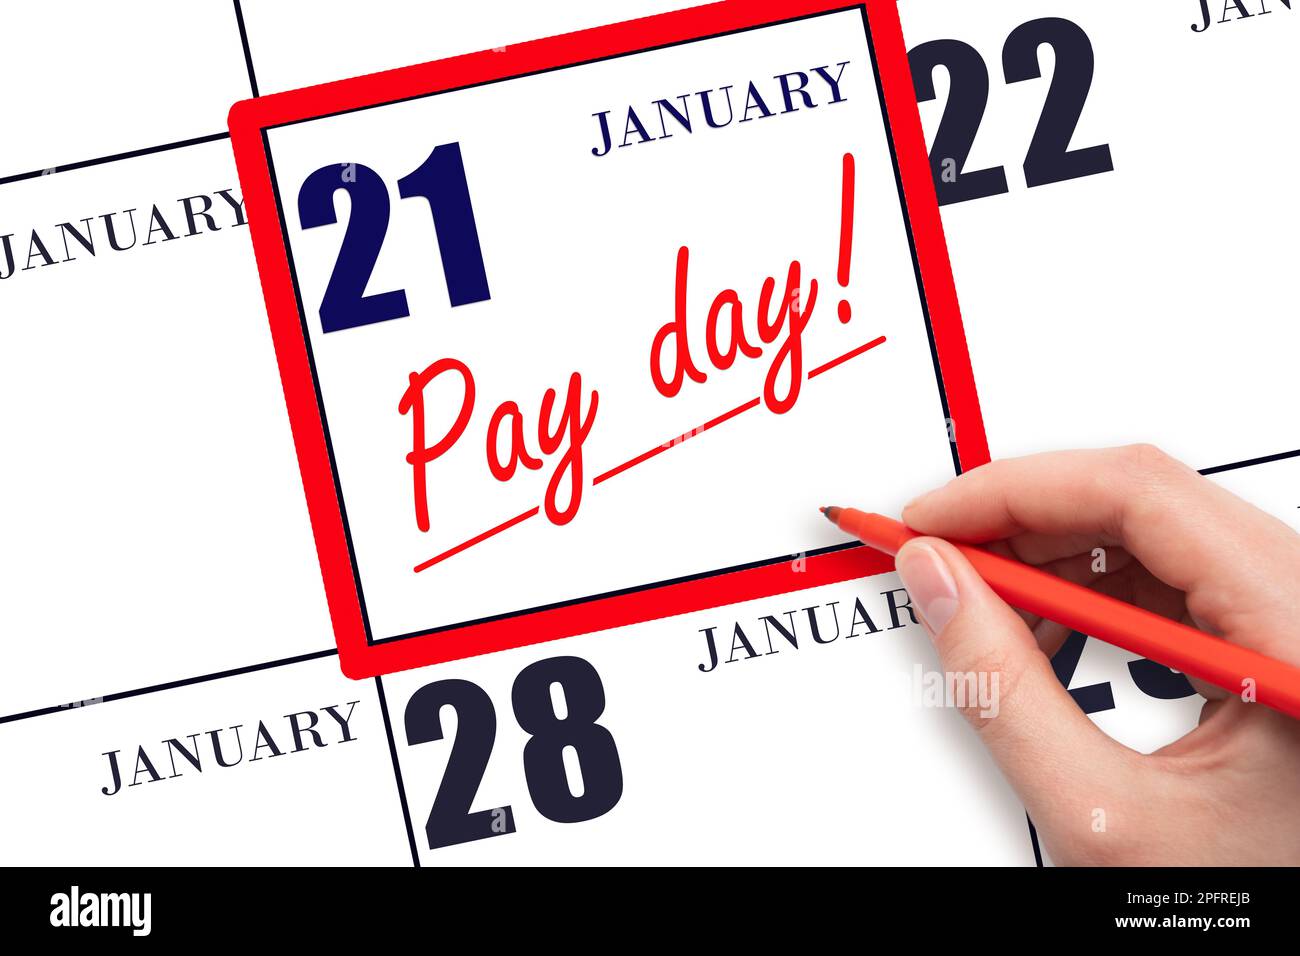 21st day of January. Hand writing text PAY DATE on calendar date January 21 and underline it. Payment due date.  Reminder concept of payment. Winter m Stock Photo